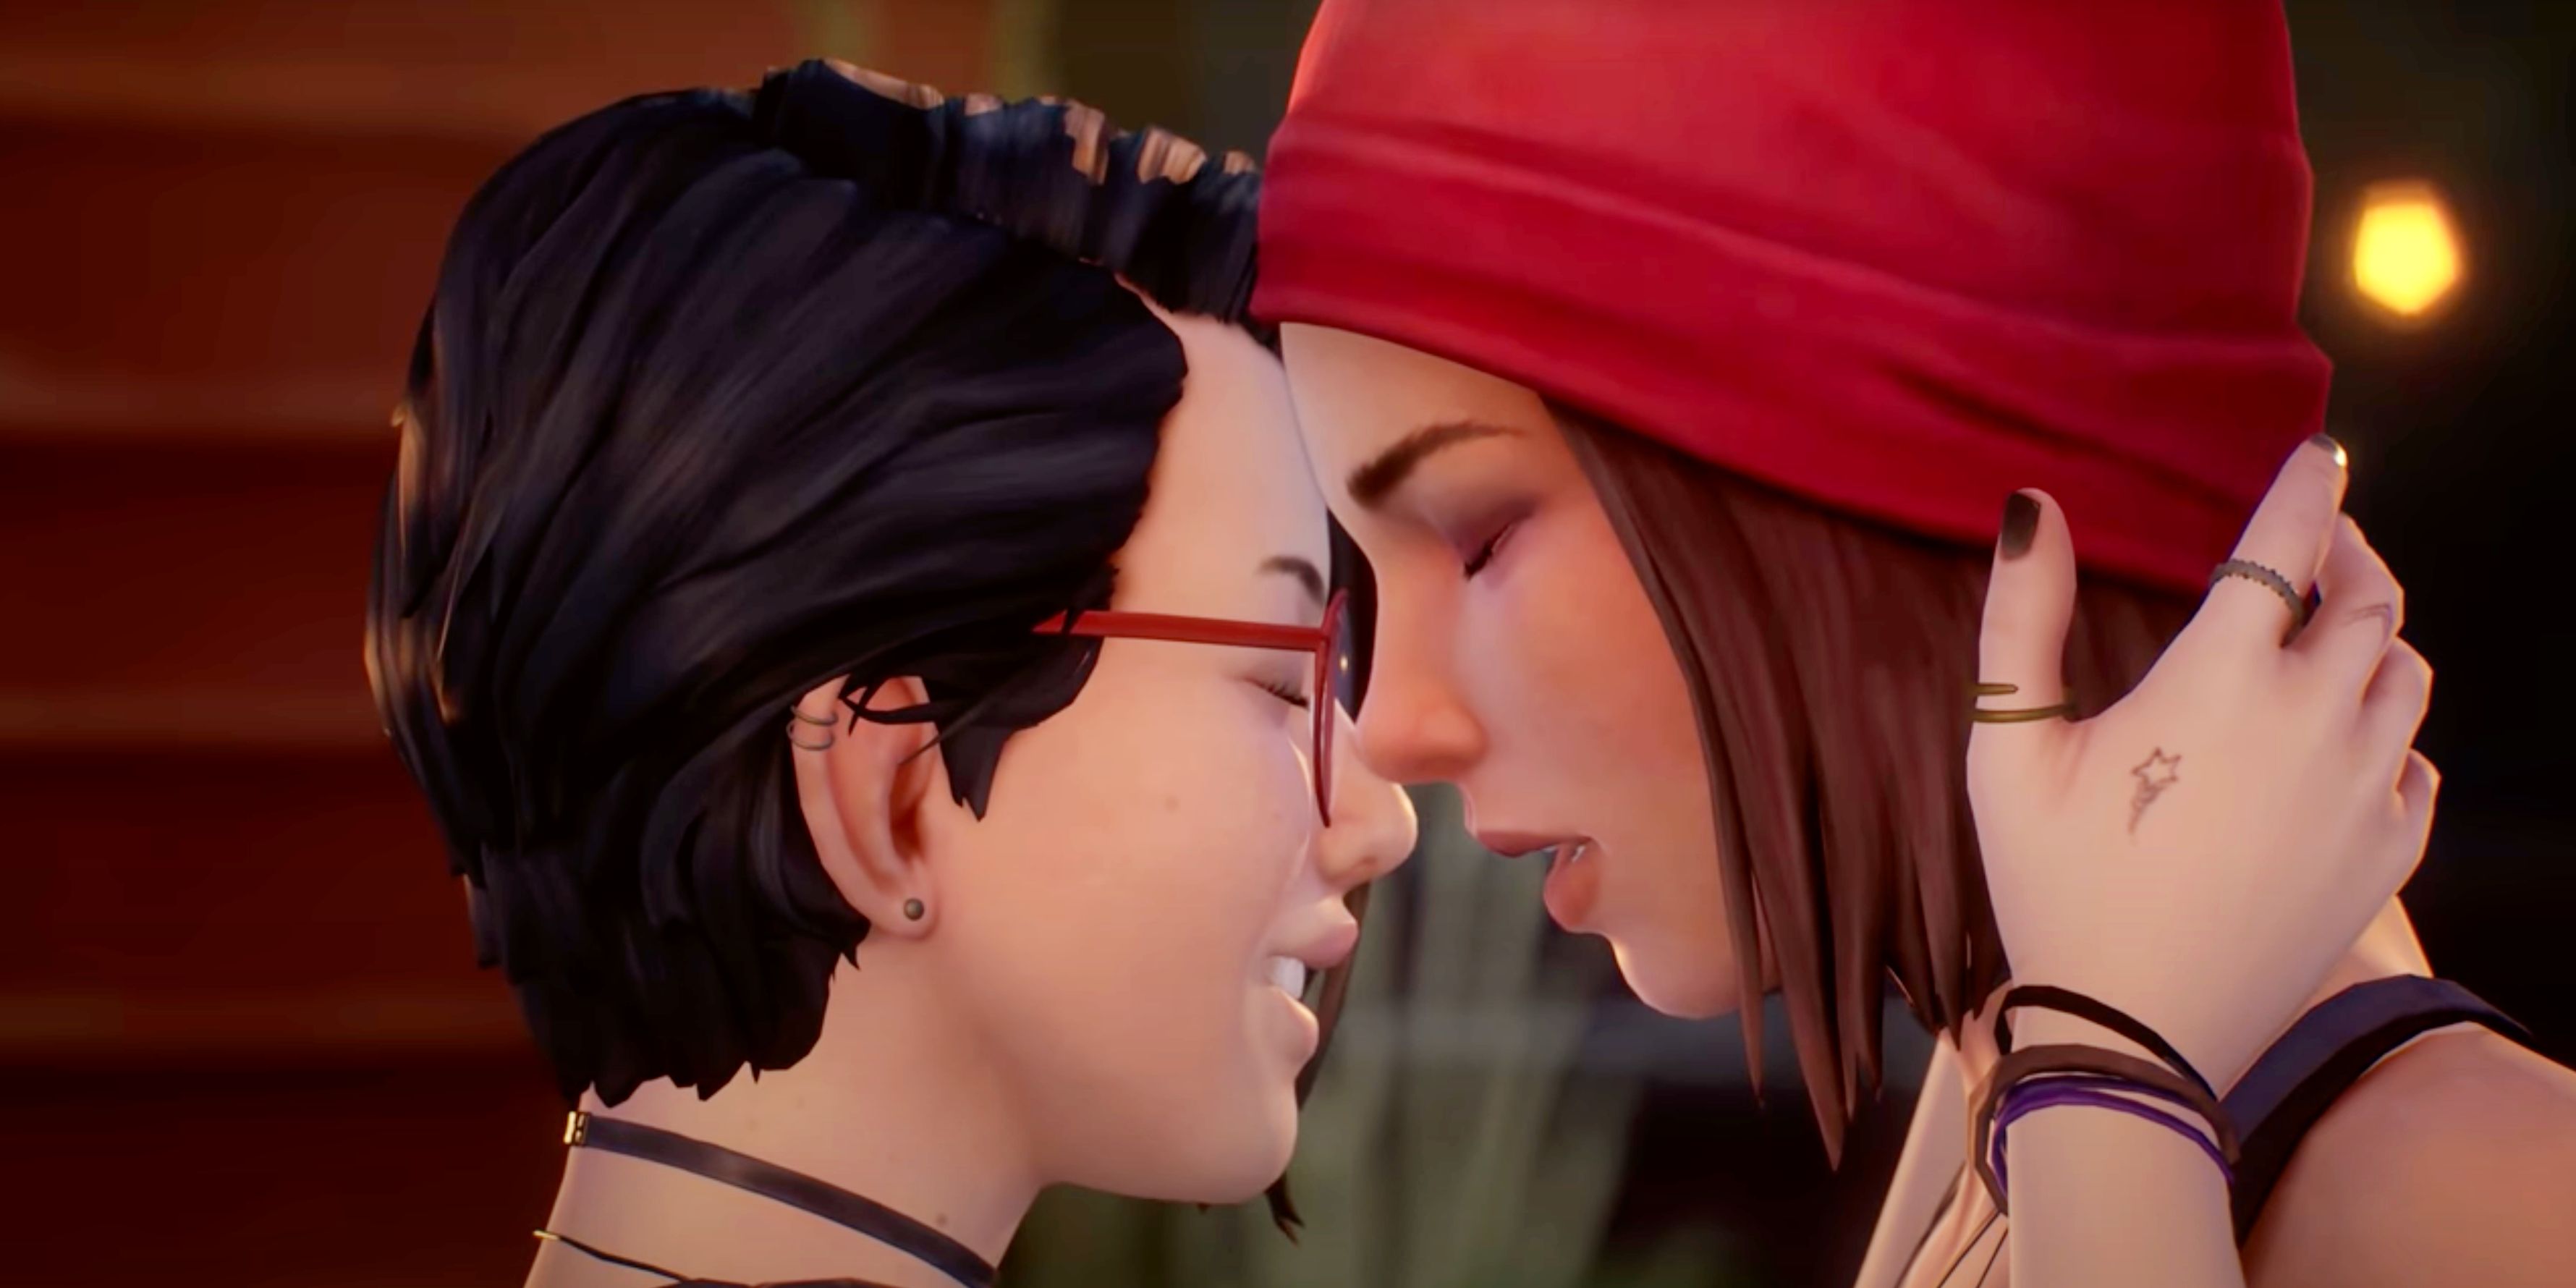 Alex and Steph, Life is Strange Wiki